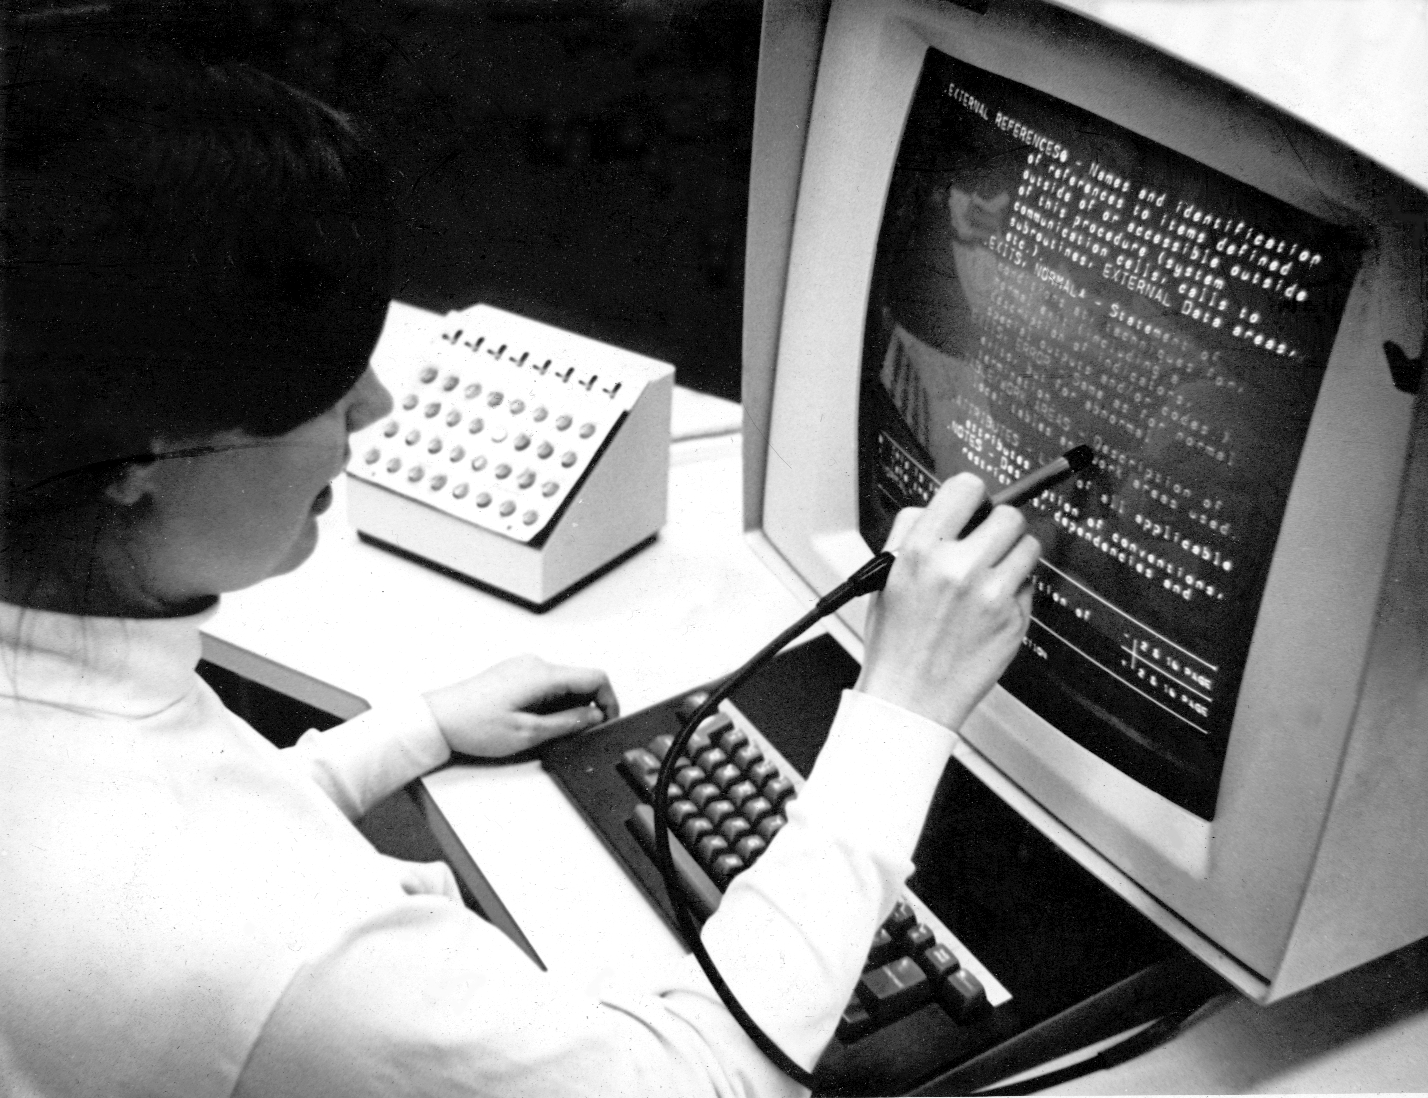 Hypertext Editing System Console Brown University - 1969